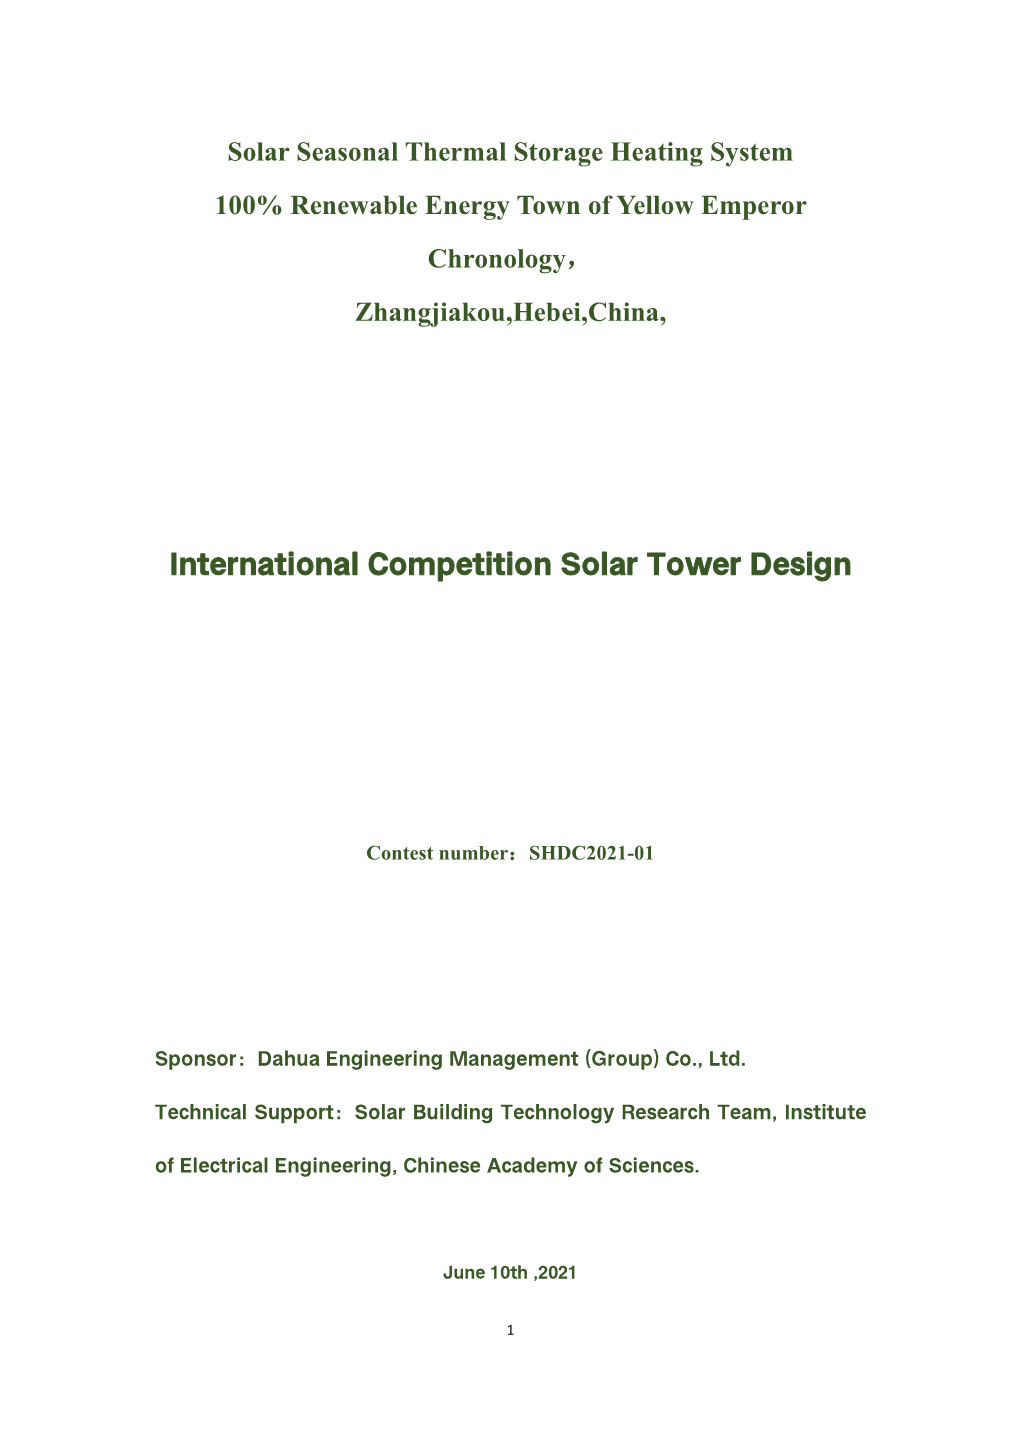 International Competition Solar Tower Design